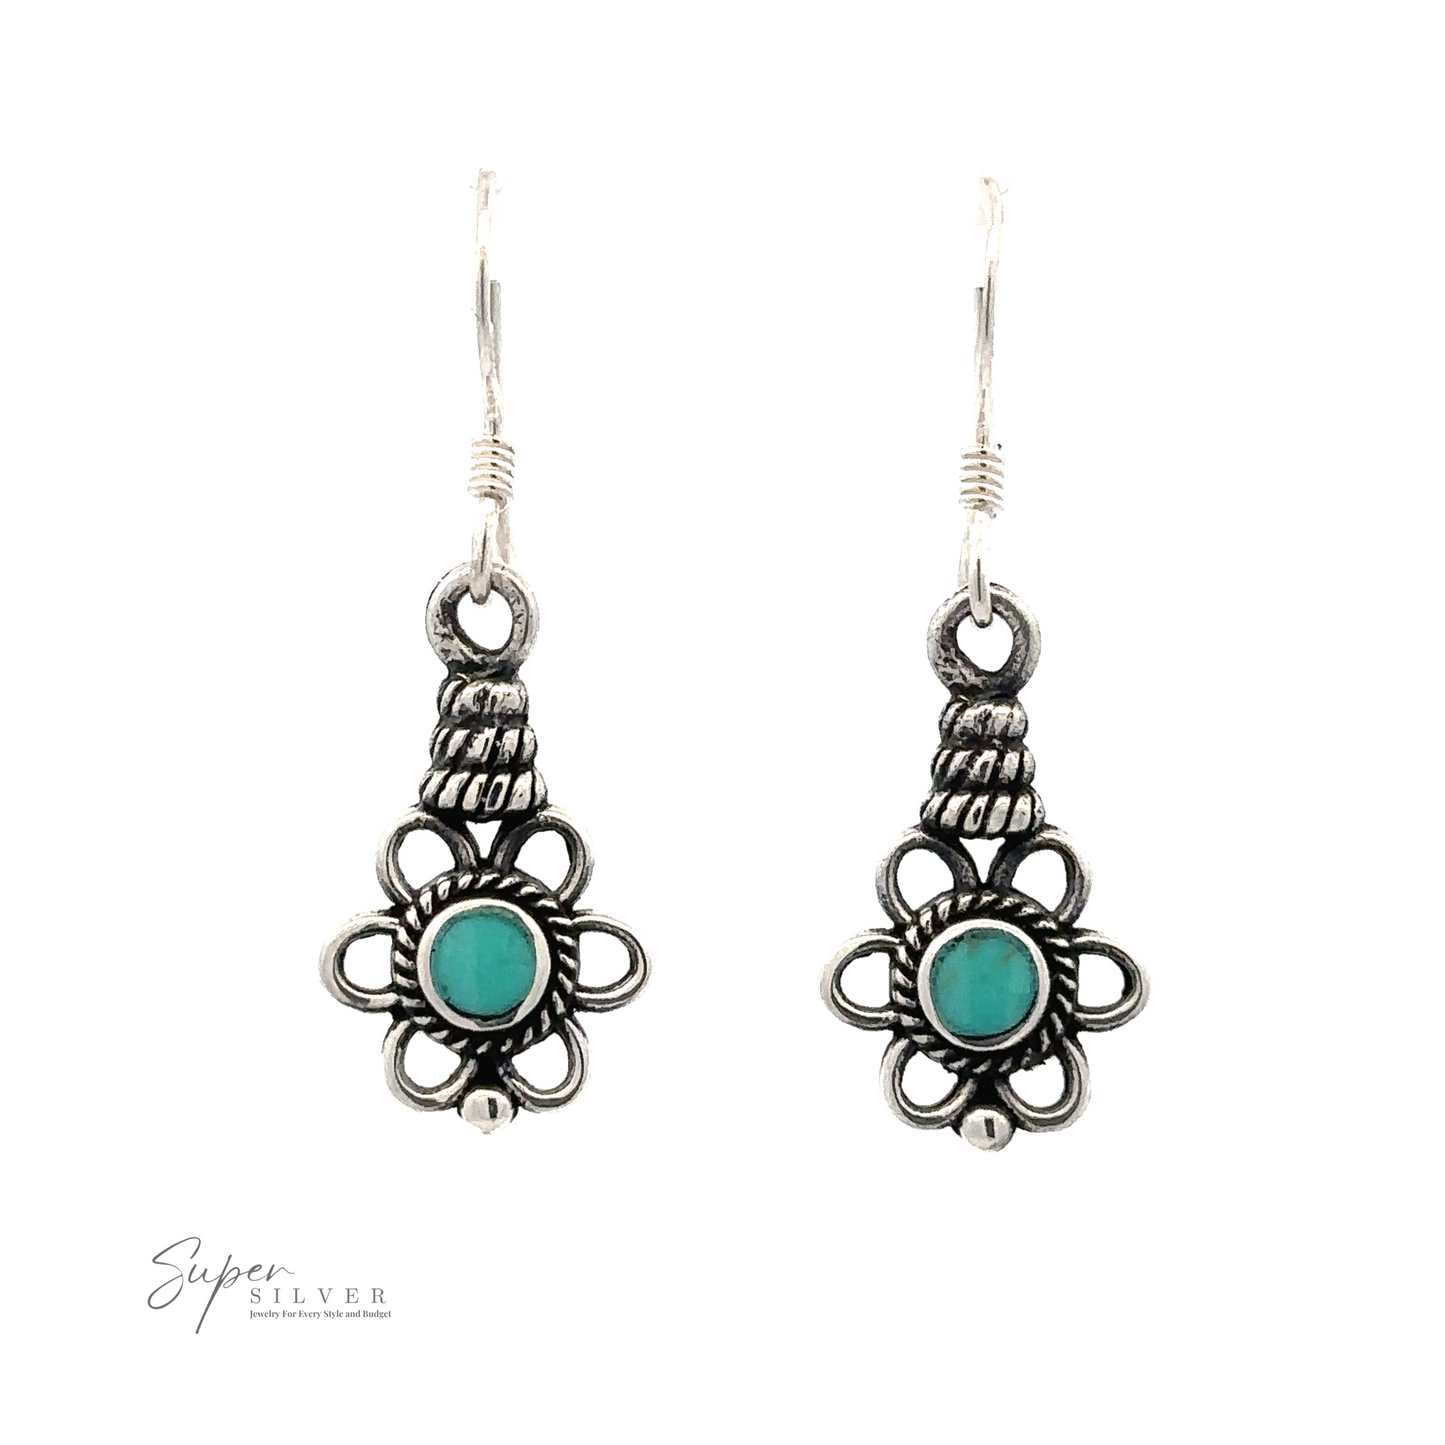 
                  
                    A pair of Flower Design Earrings With a Round Stone with intricate floral designs and turquoise round center stones. Logo "Super Silver" is visible at the bottom left.
                  
                